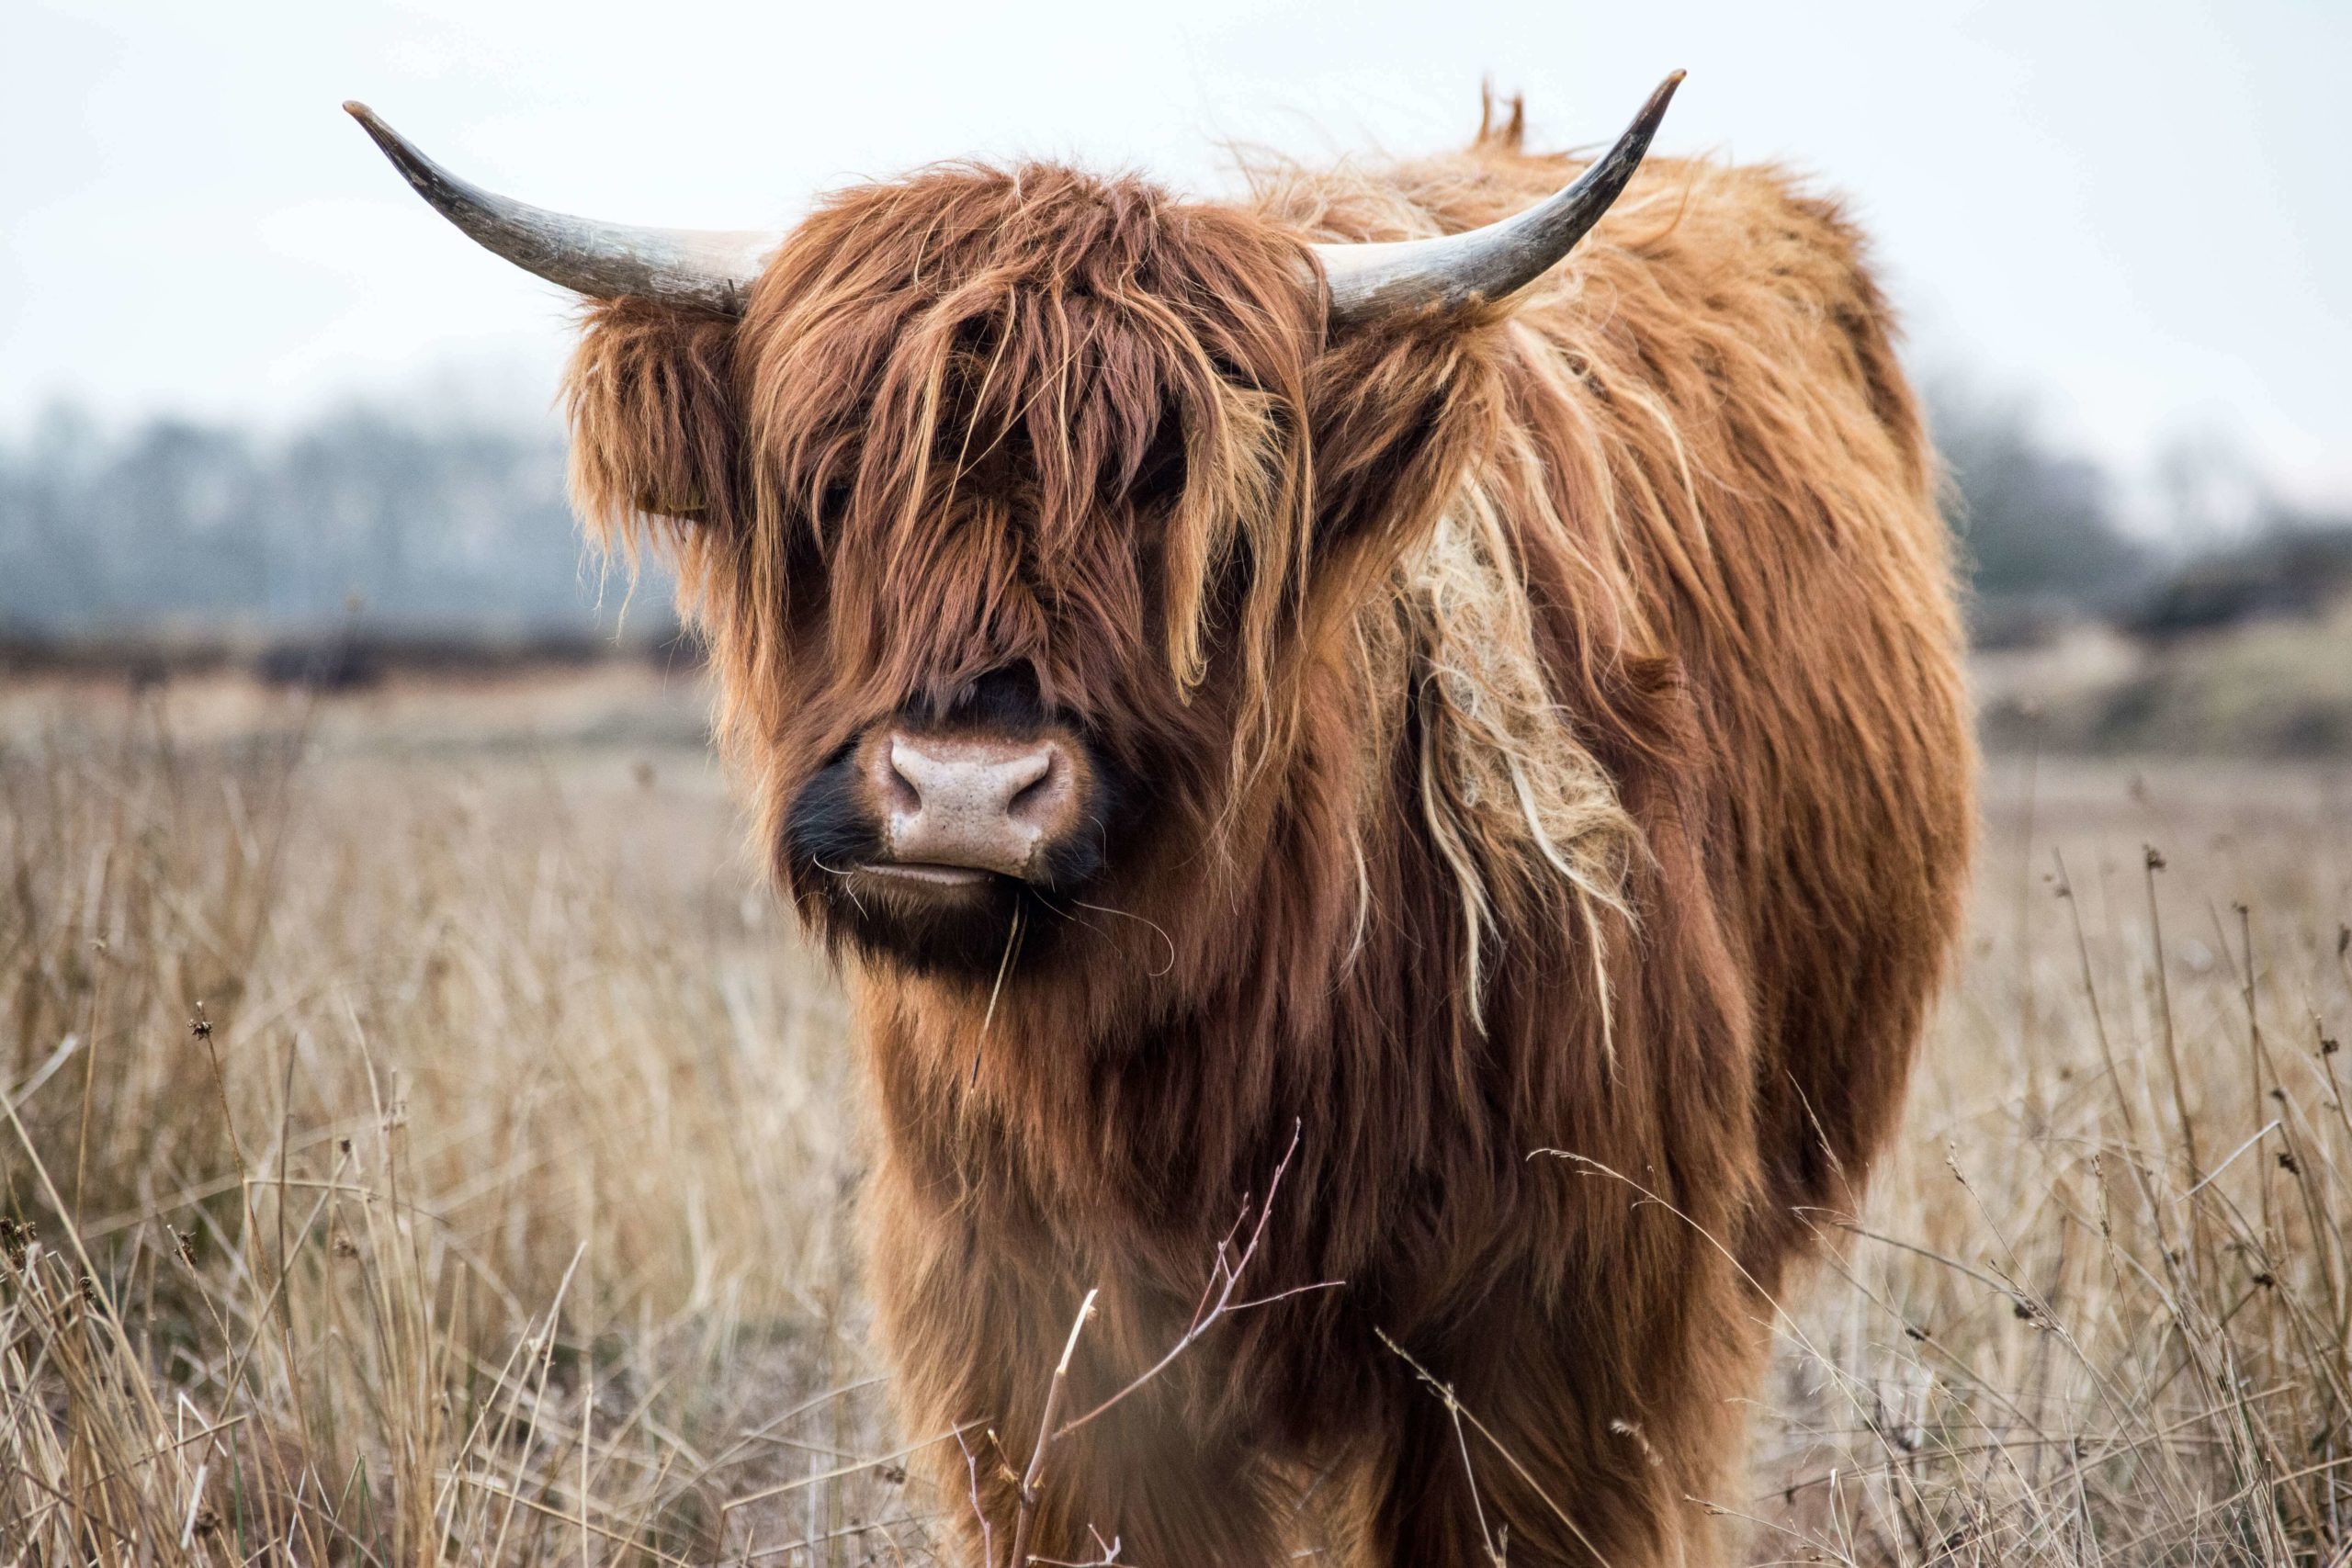 Picture of a yak, which begins with the letter y